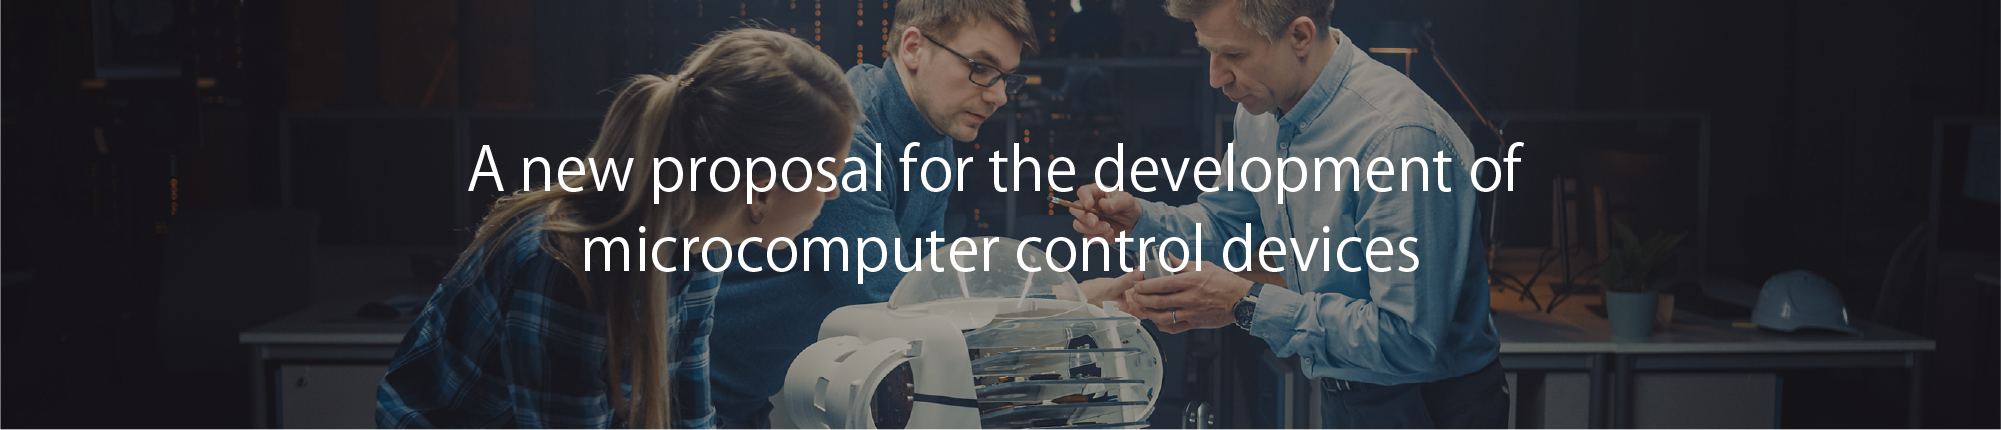 New proposal for development of mass production equipment for microcomputer control